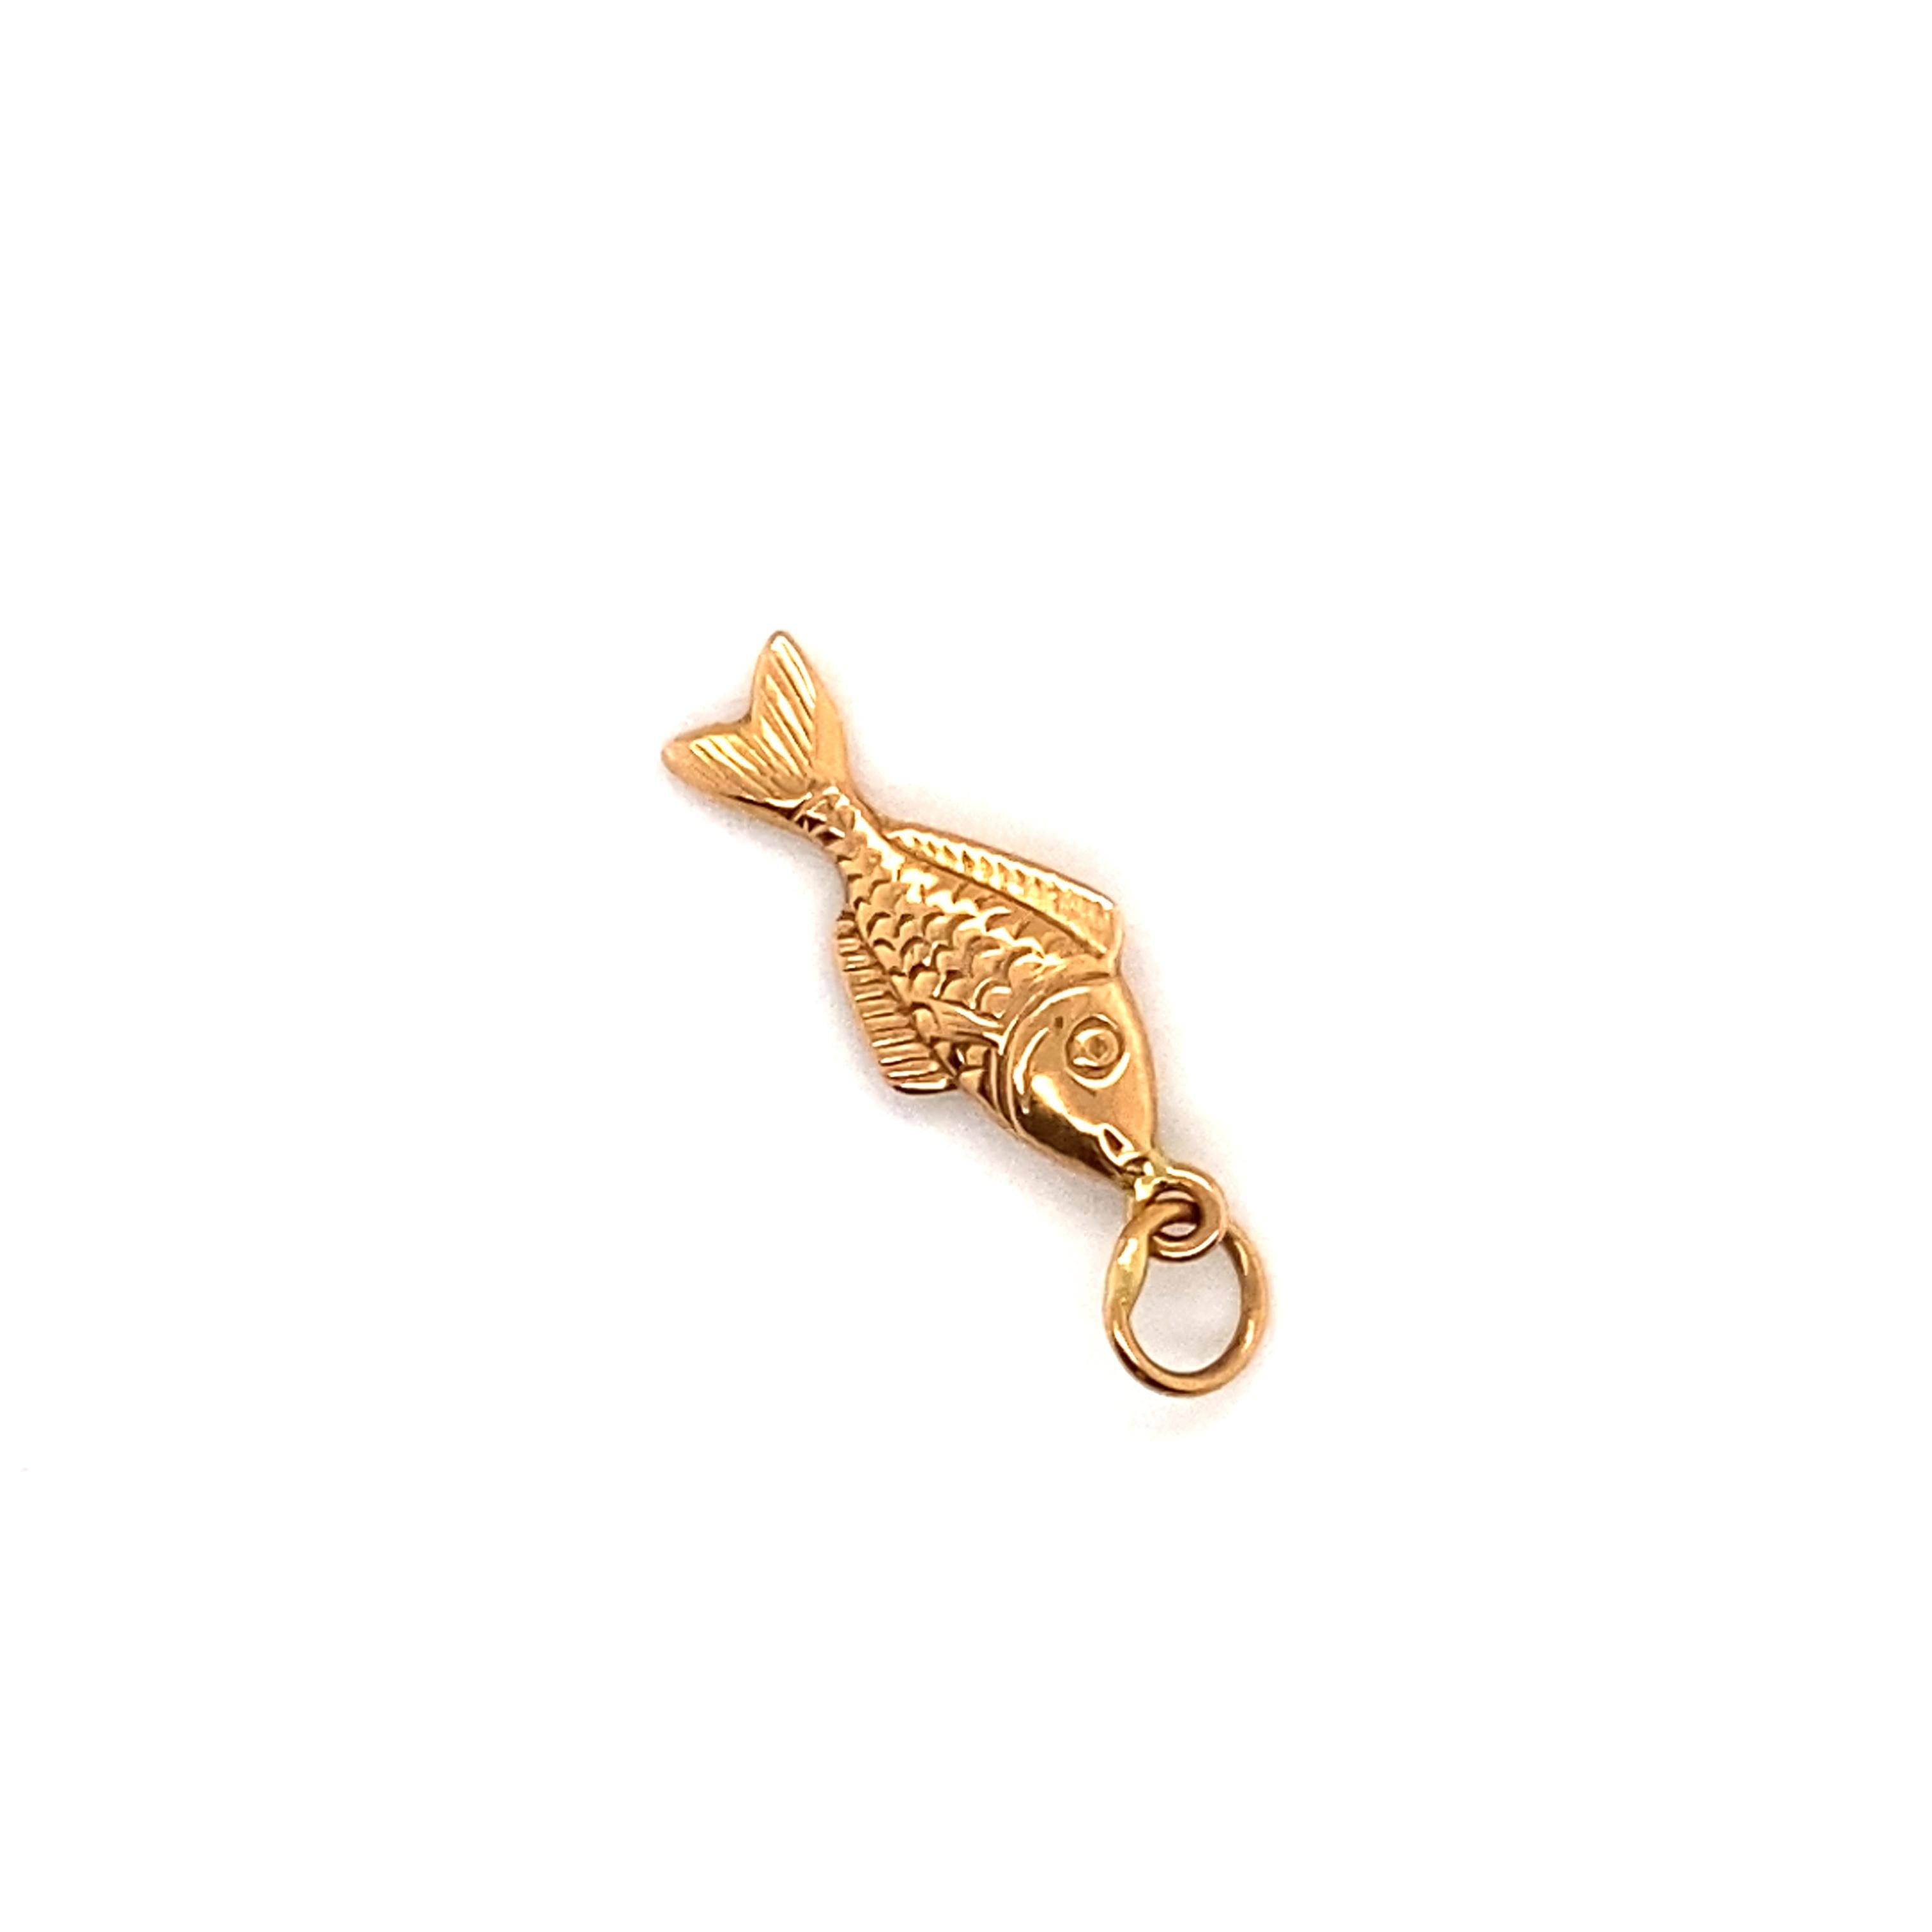 1950s Hanging Fish Angler Charm set in 14 Karat Yellow Gold In Excellent Condition For Sale In Atlanta, GA